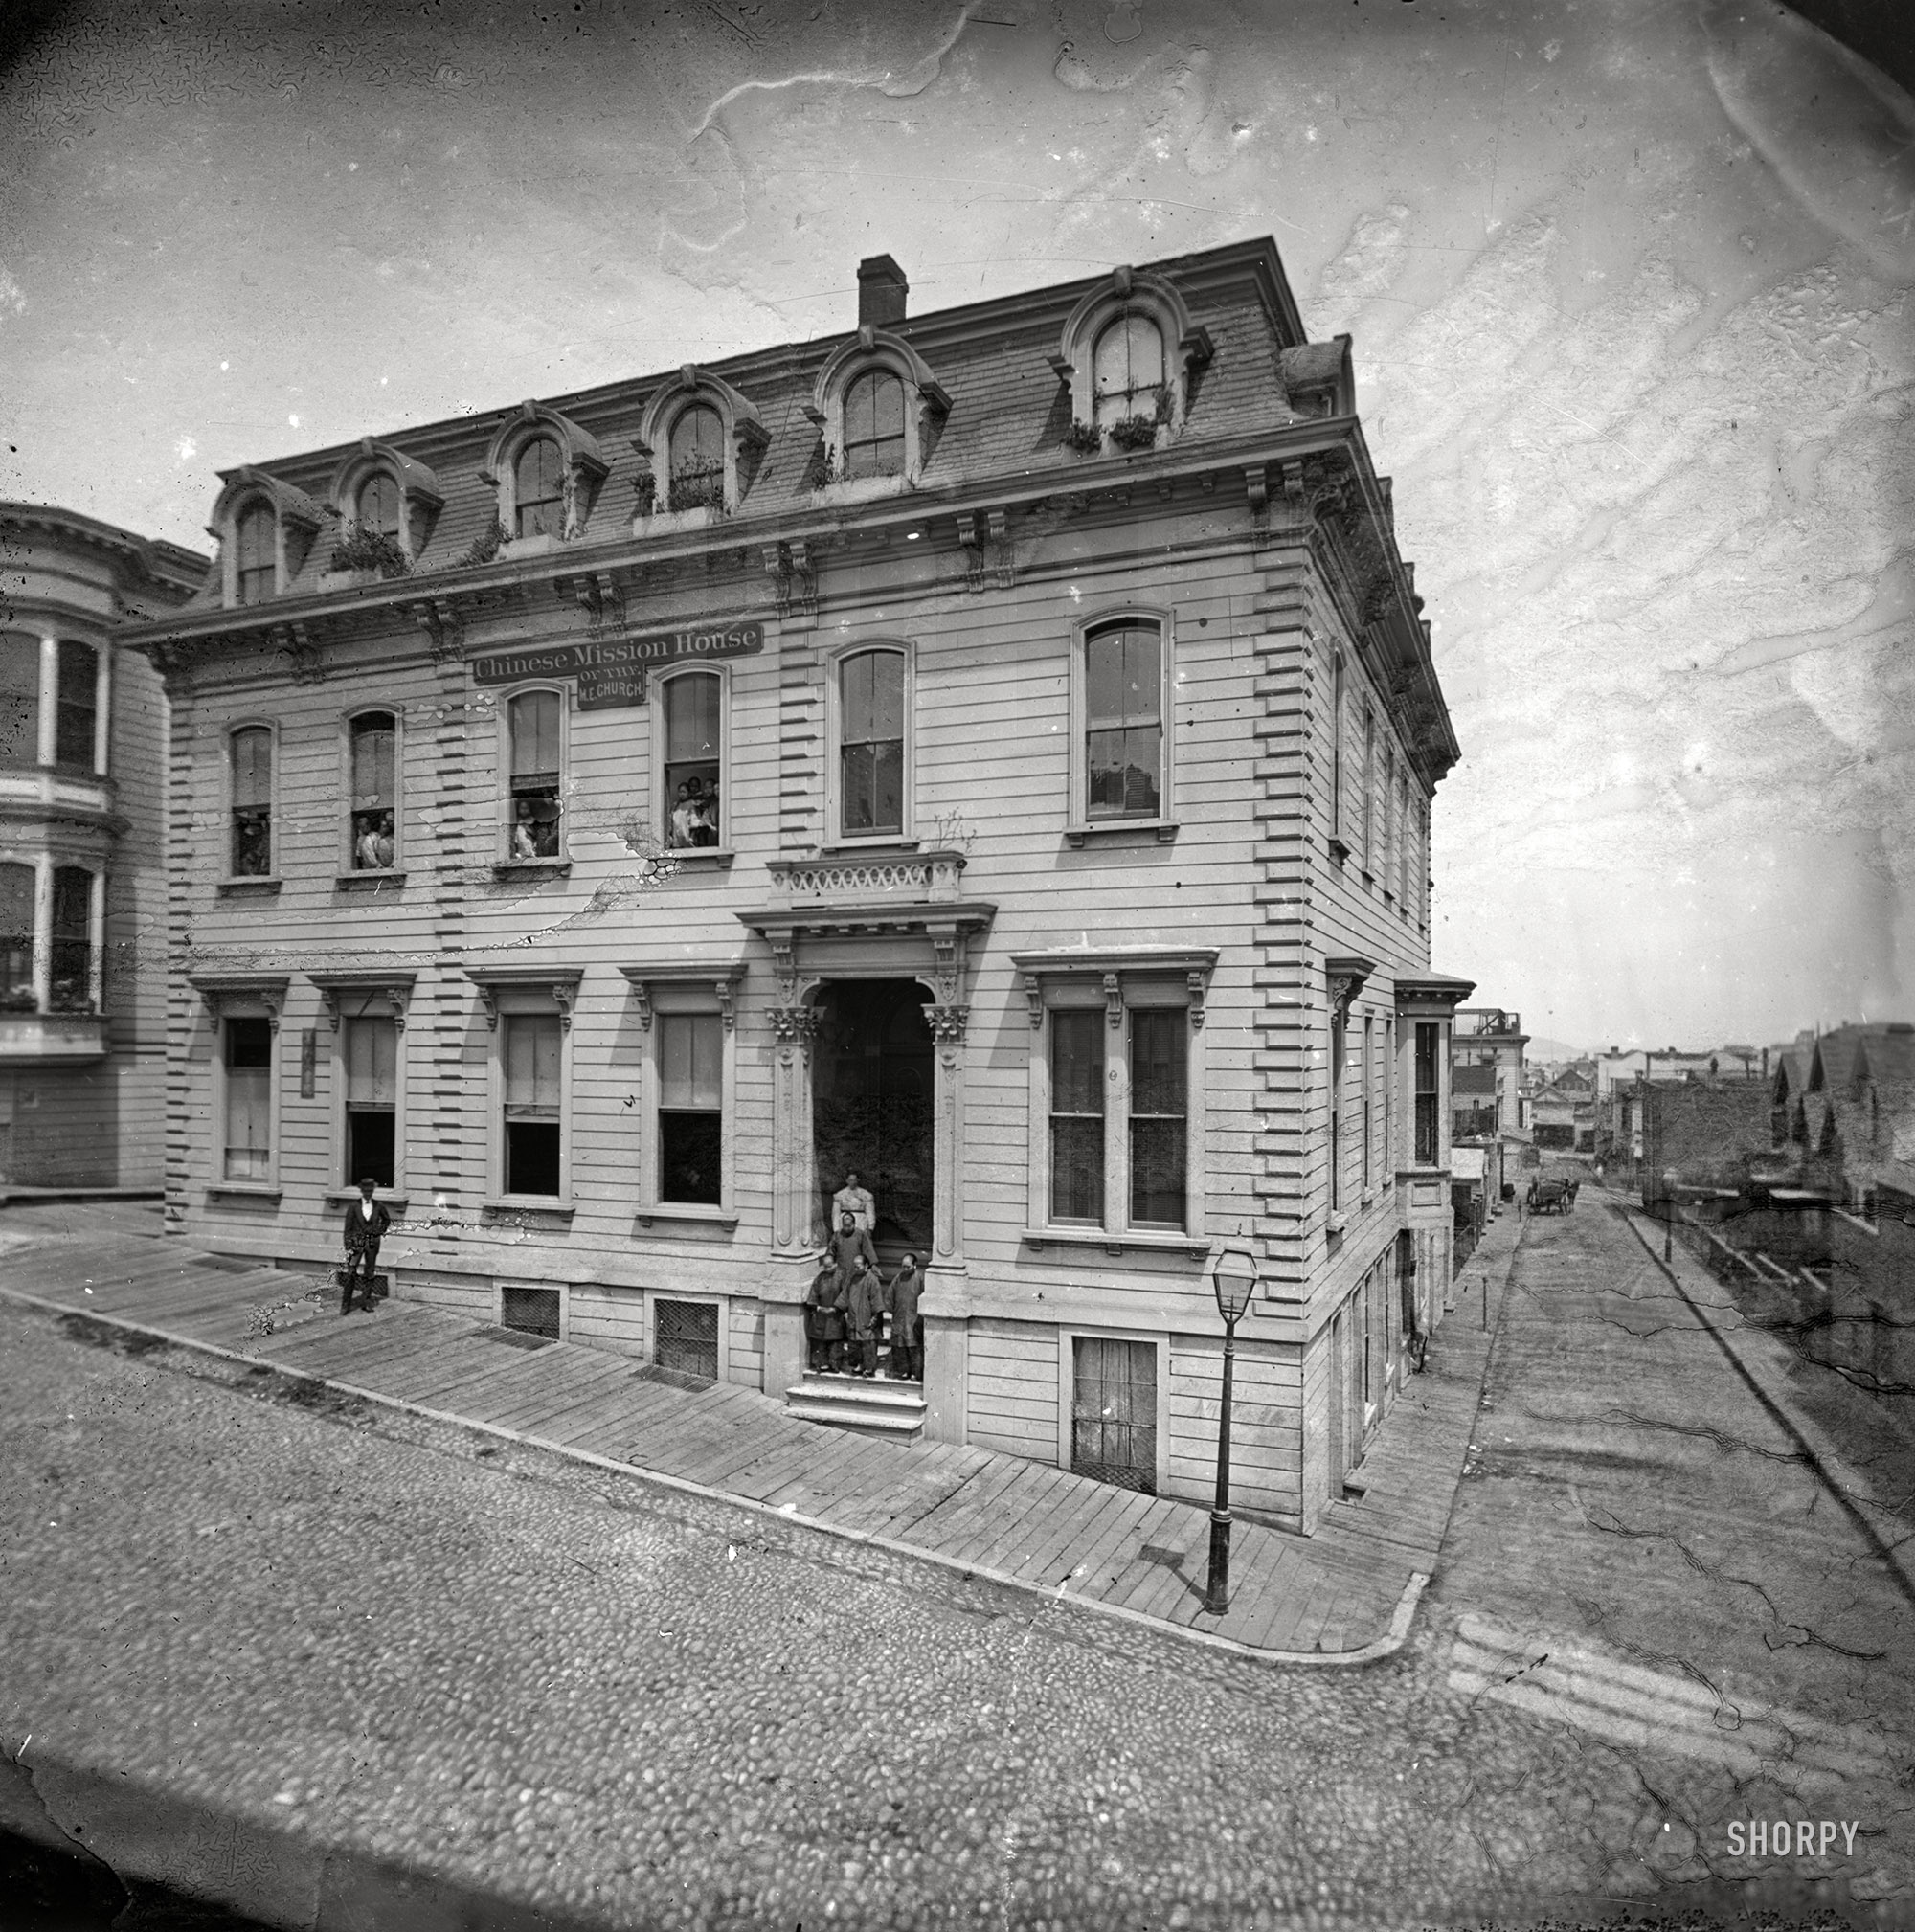 San Francisco circa 1880s. "Chinese Mission House of the M.E. Church, 916 Washington Street." 5x5 inch glass heliograph transparency, formerly of the Wyland Stanley and Marilyn Blaisdell collections. View full size.